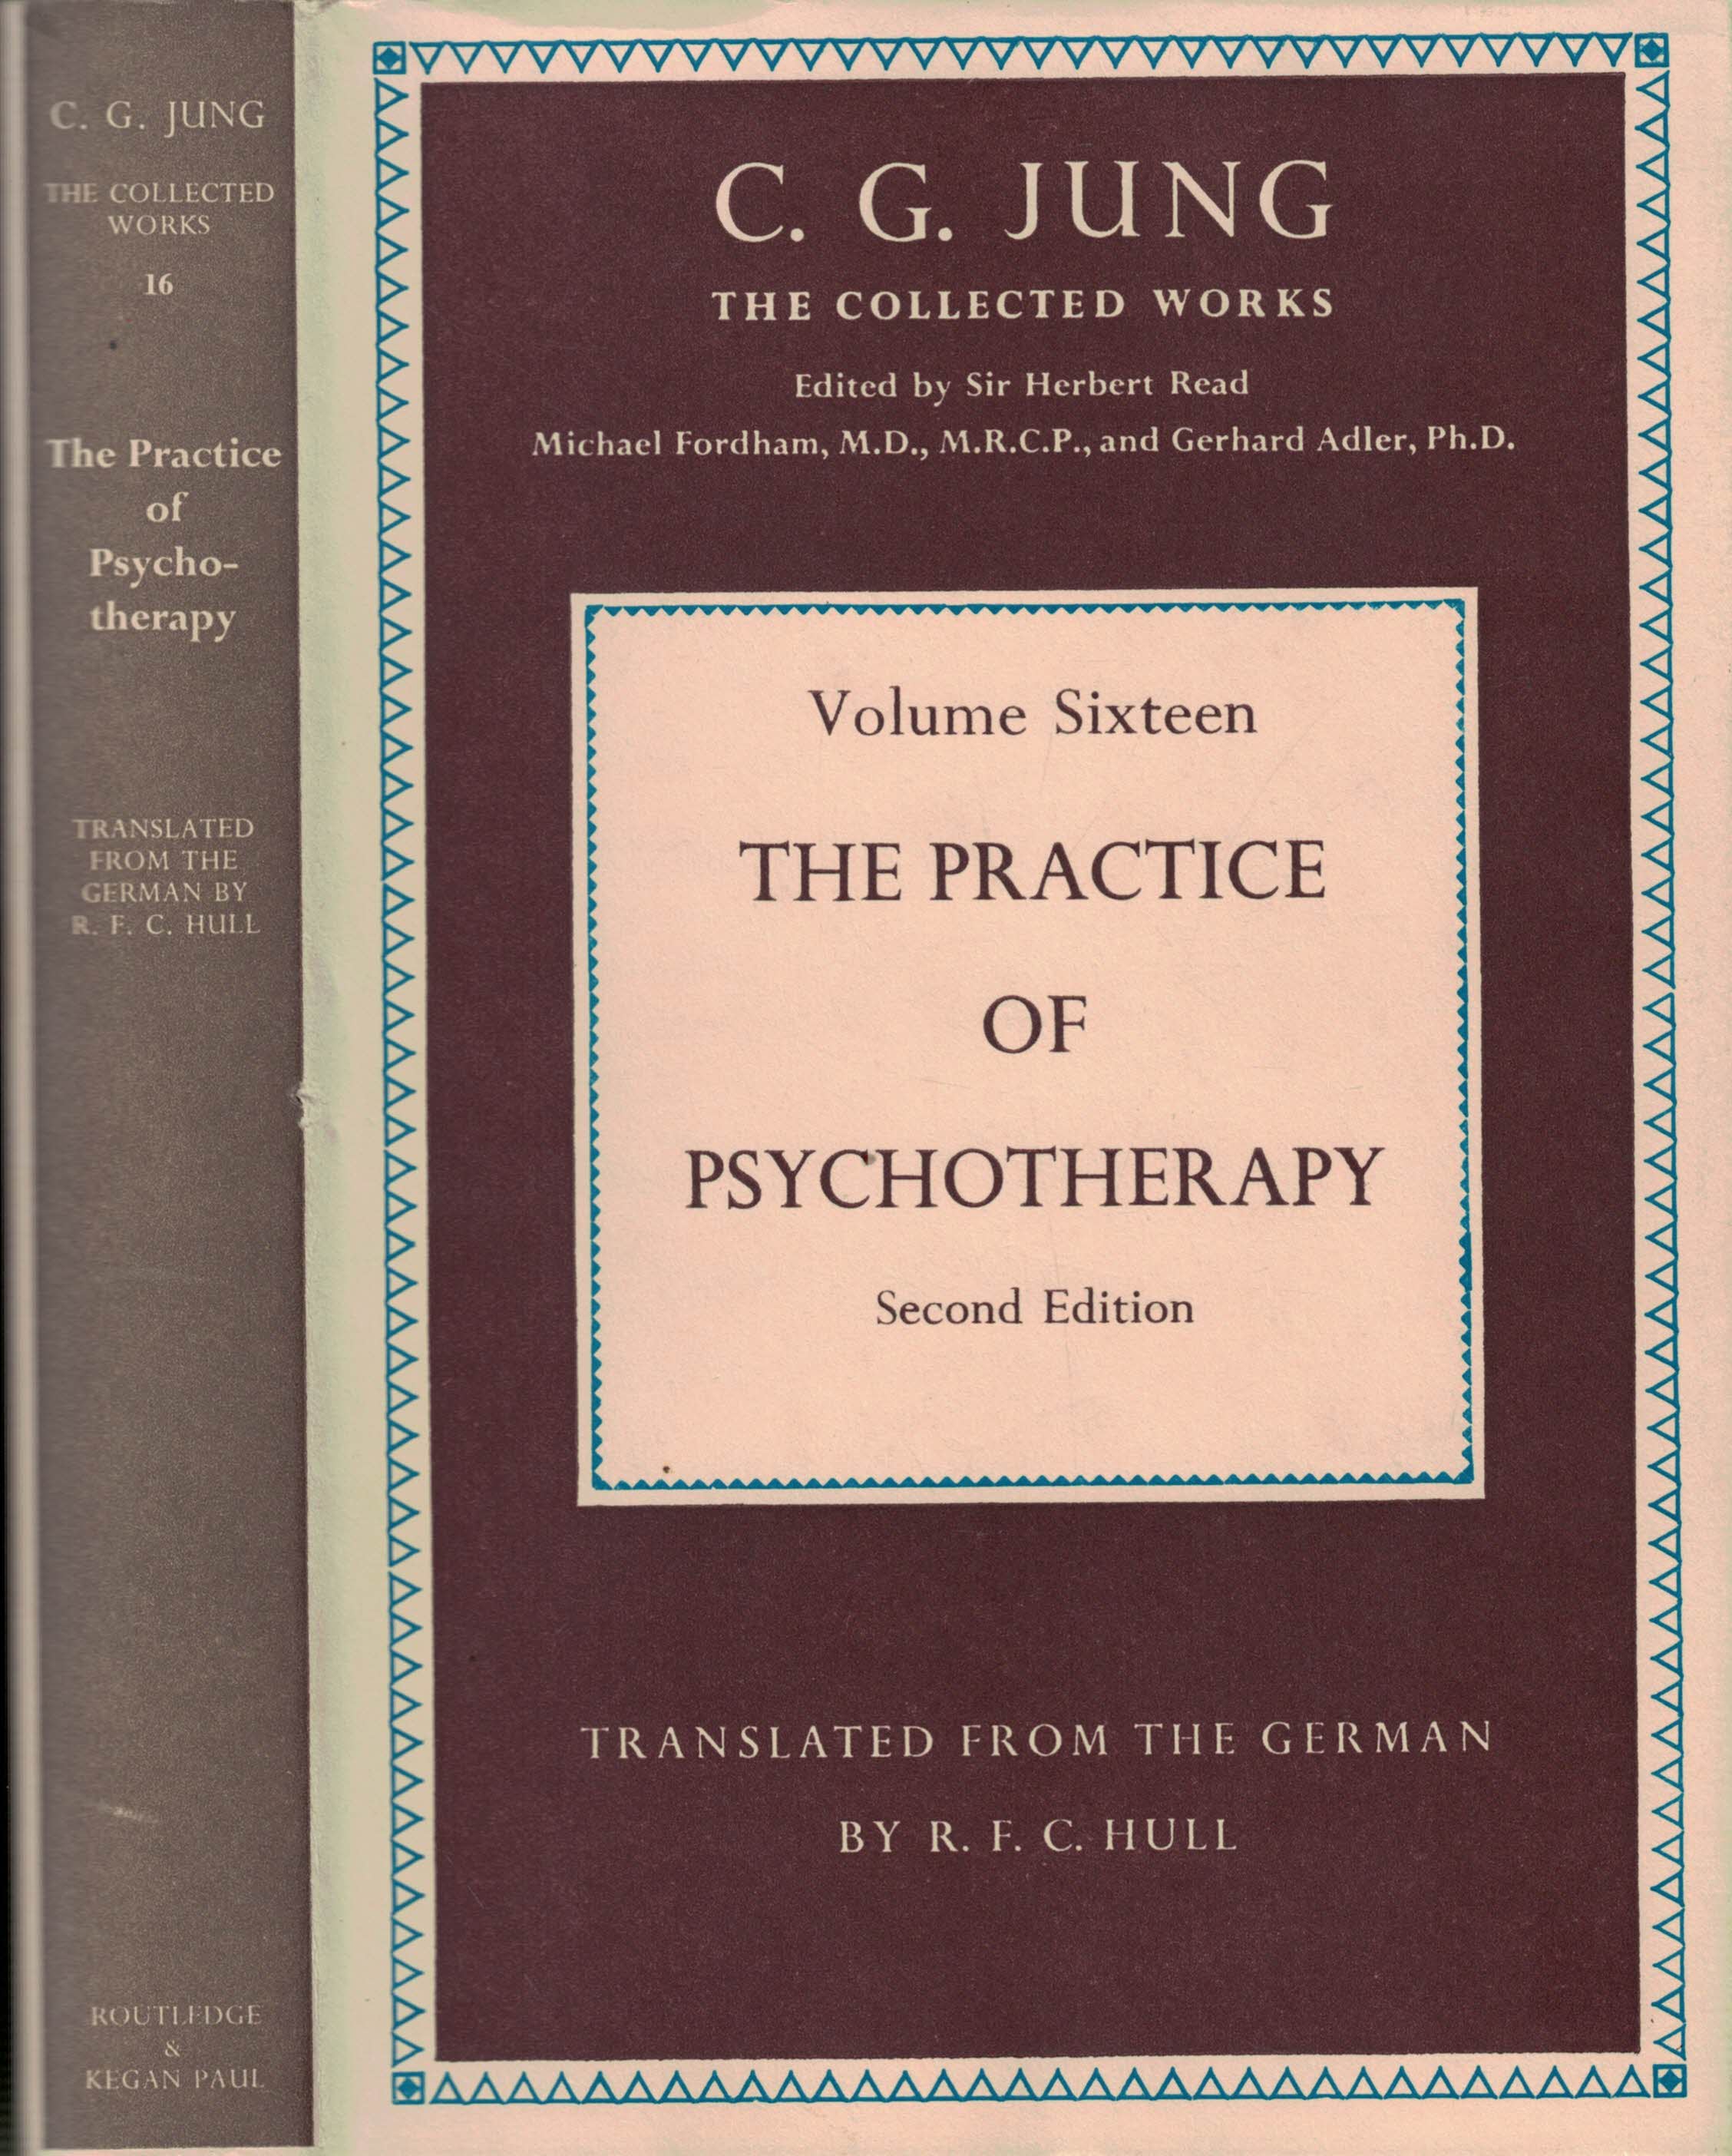 The Practice of Psychotherapy. The Collected Works. Volume Sixteen.